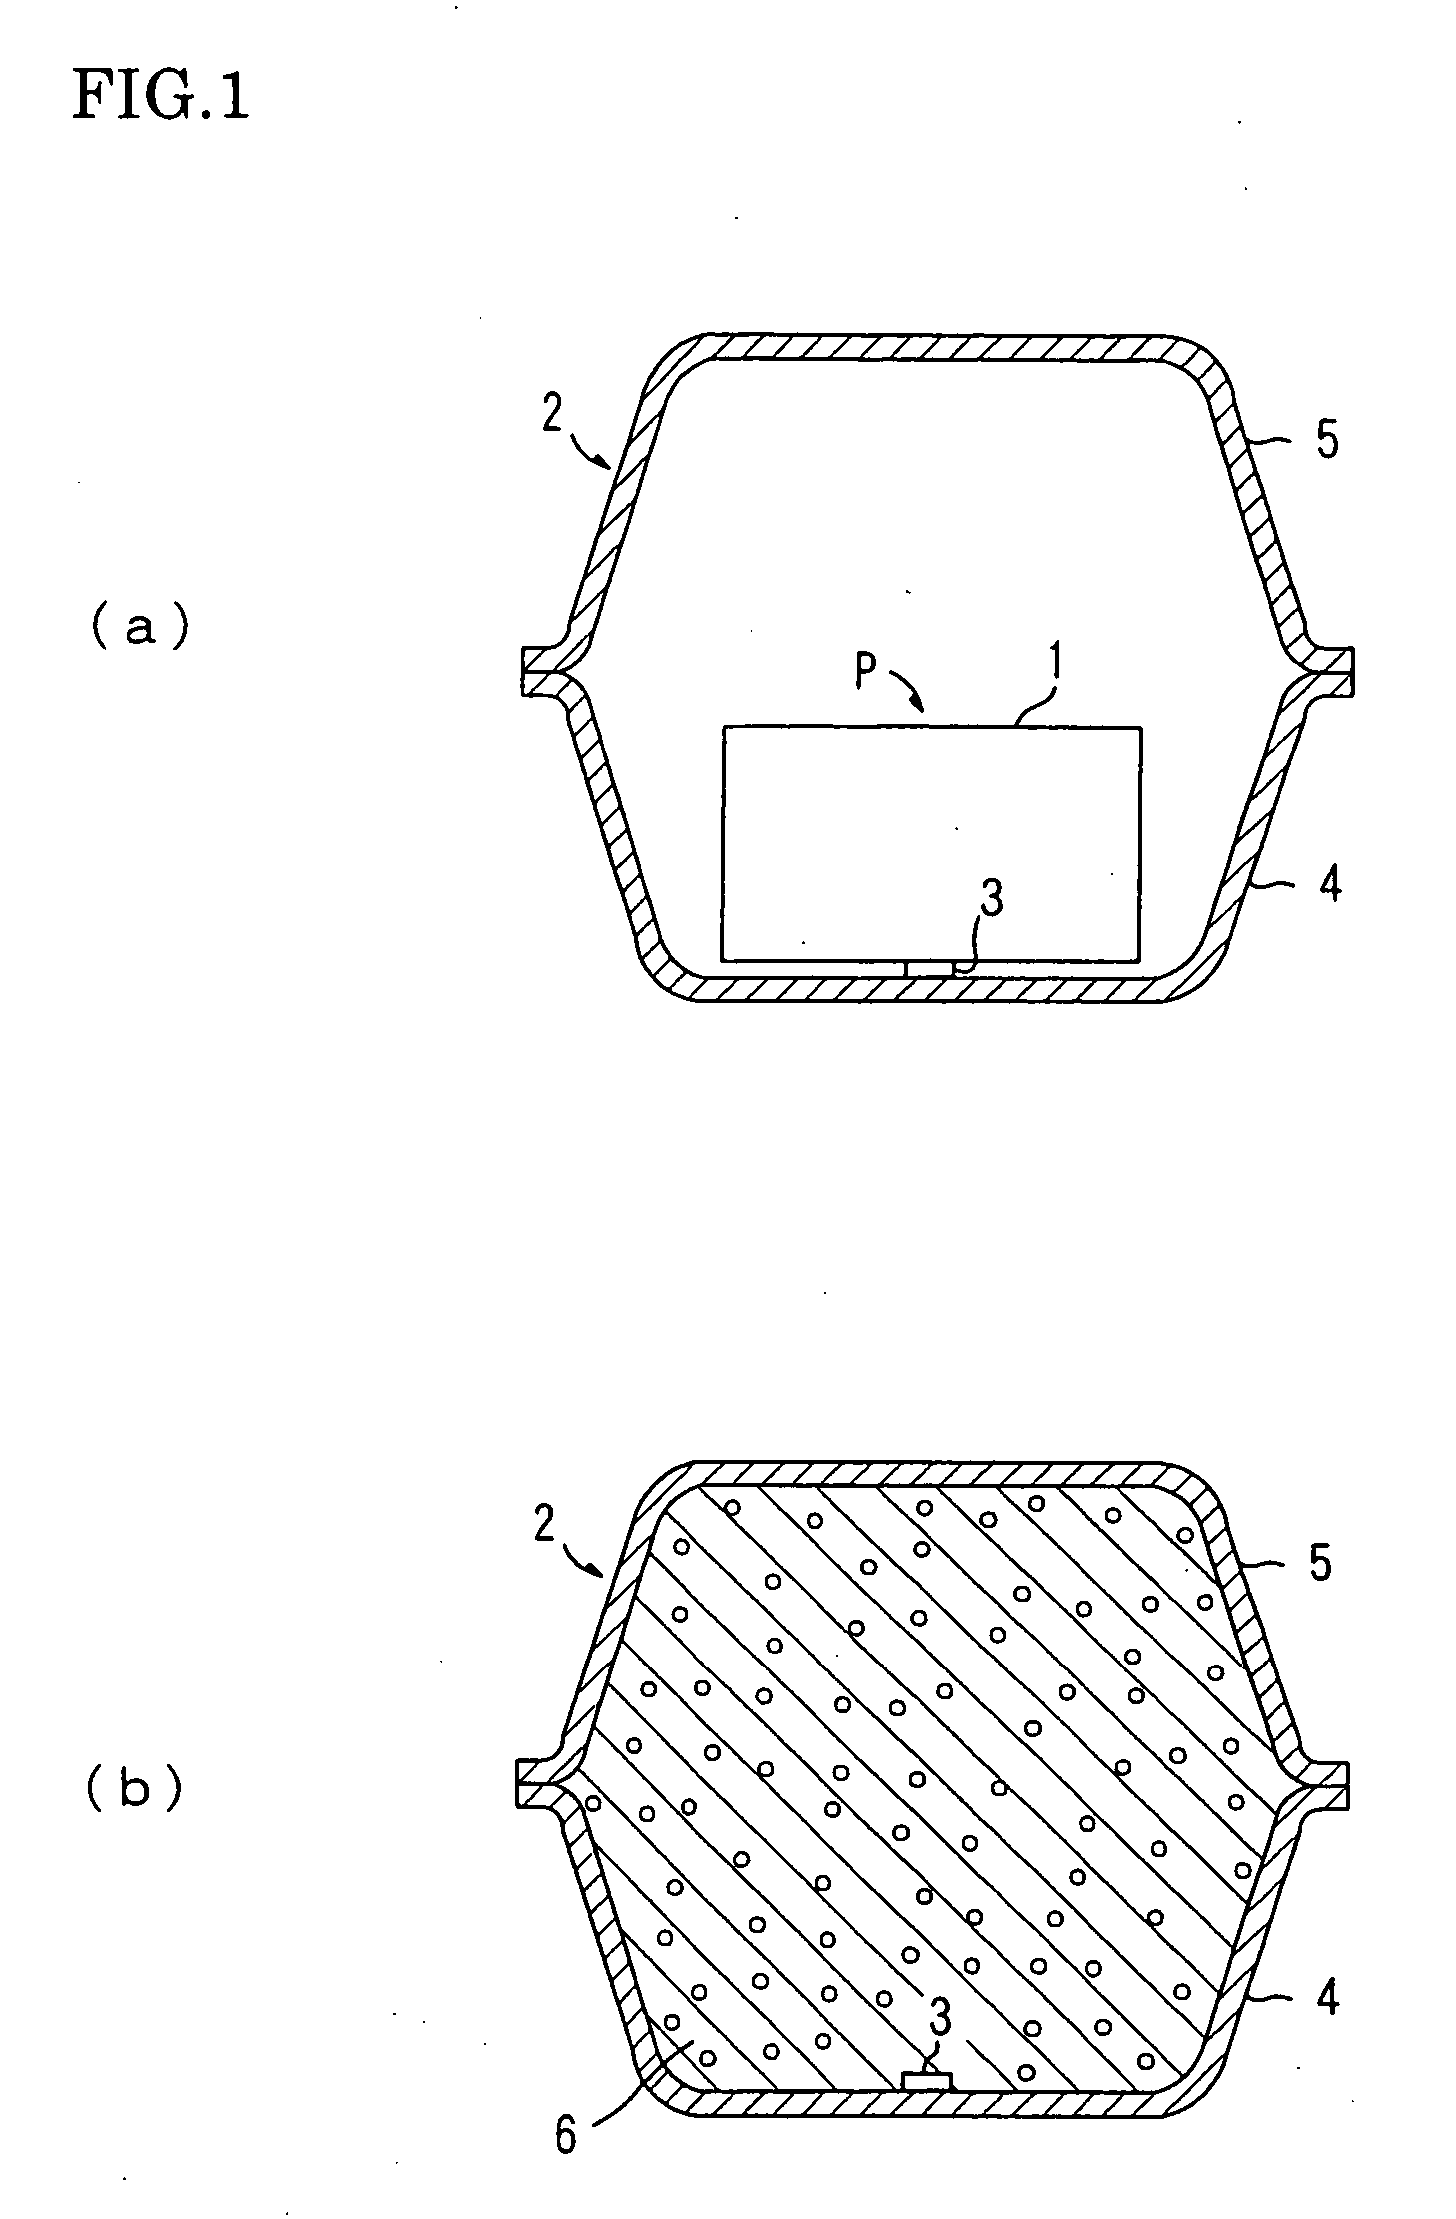 Expandable composition for filling use, expandable member for filling use and expanded article for filling use